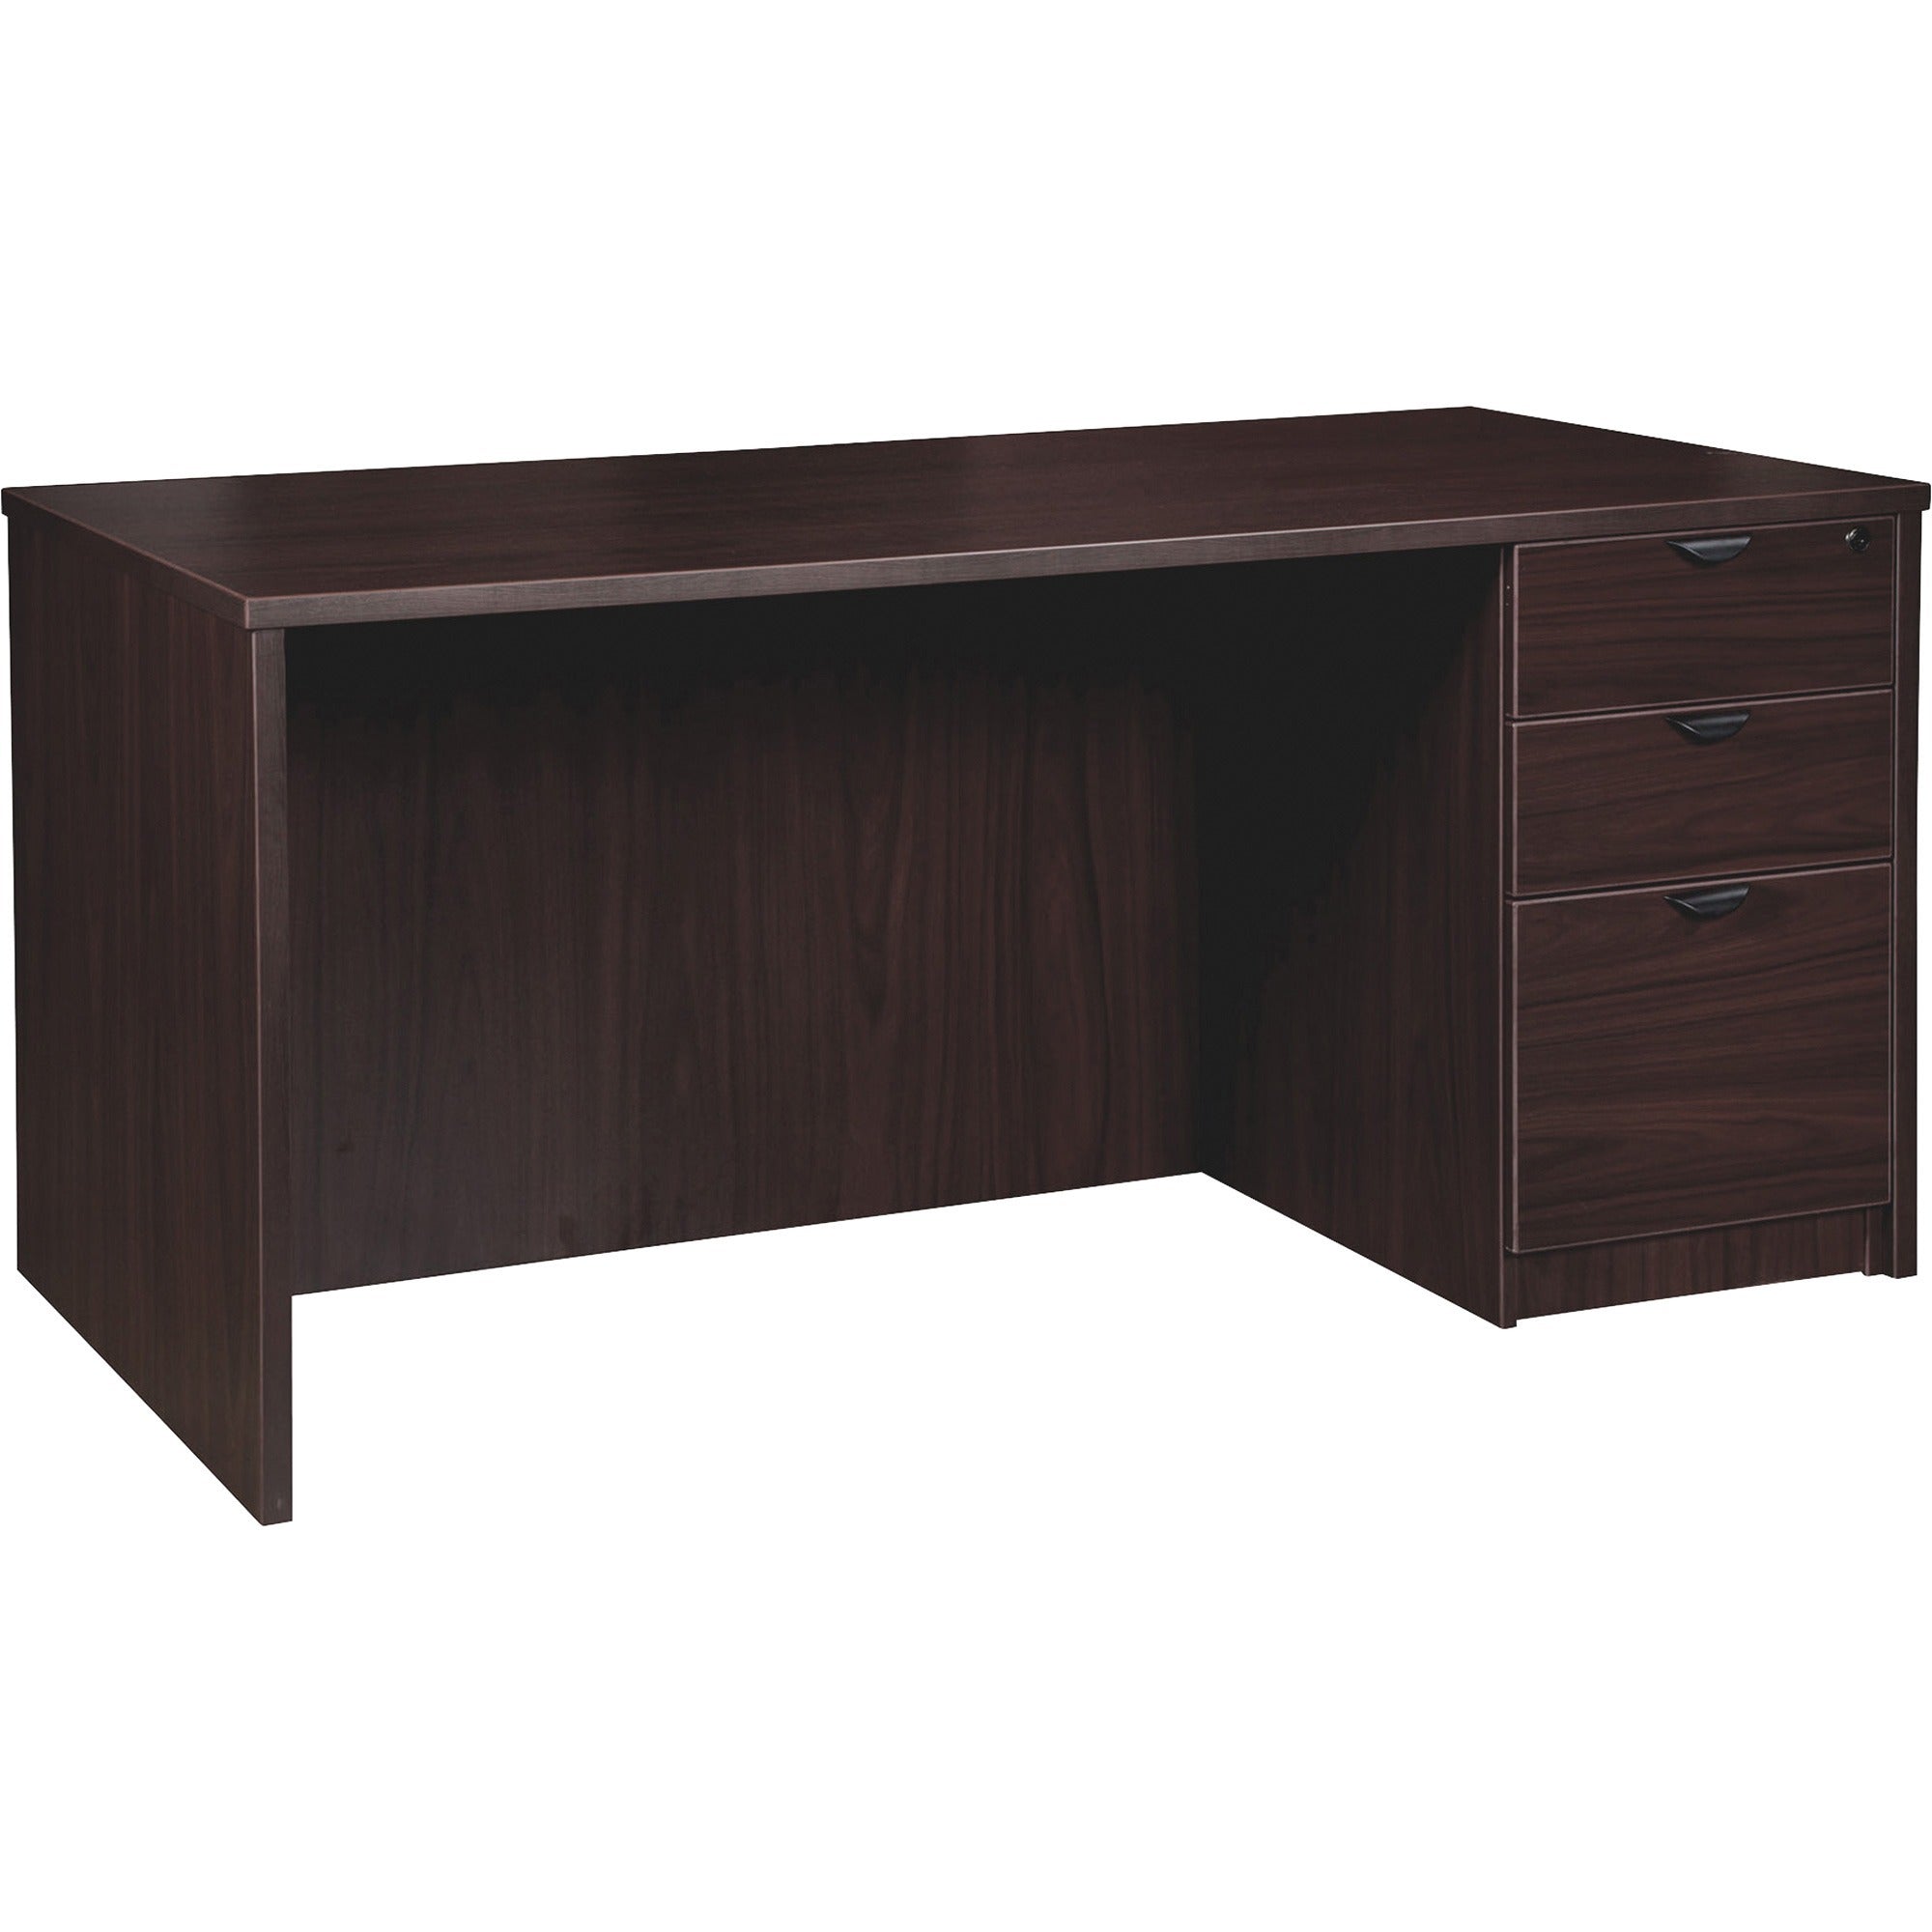 lorell-prominence-20-3-4-double-pedestal-desk-1-top-60-x-3029-3-x-file-box-drawers-single-pedestal-on-right-side-band-edge-material-particleboard-finish-espresso-laminate-thermofused-melamine-tfm_llrpd3060rspes - 1